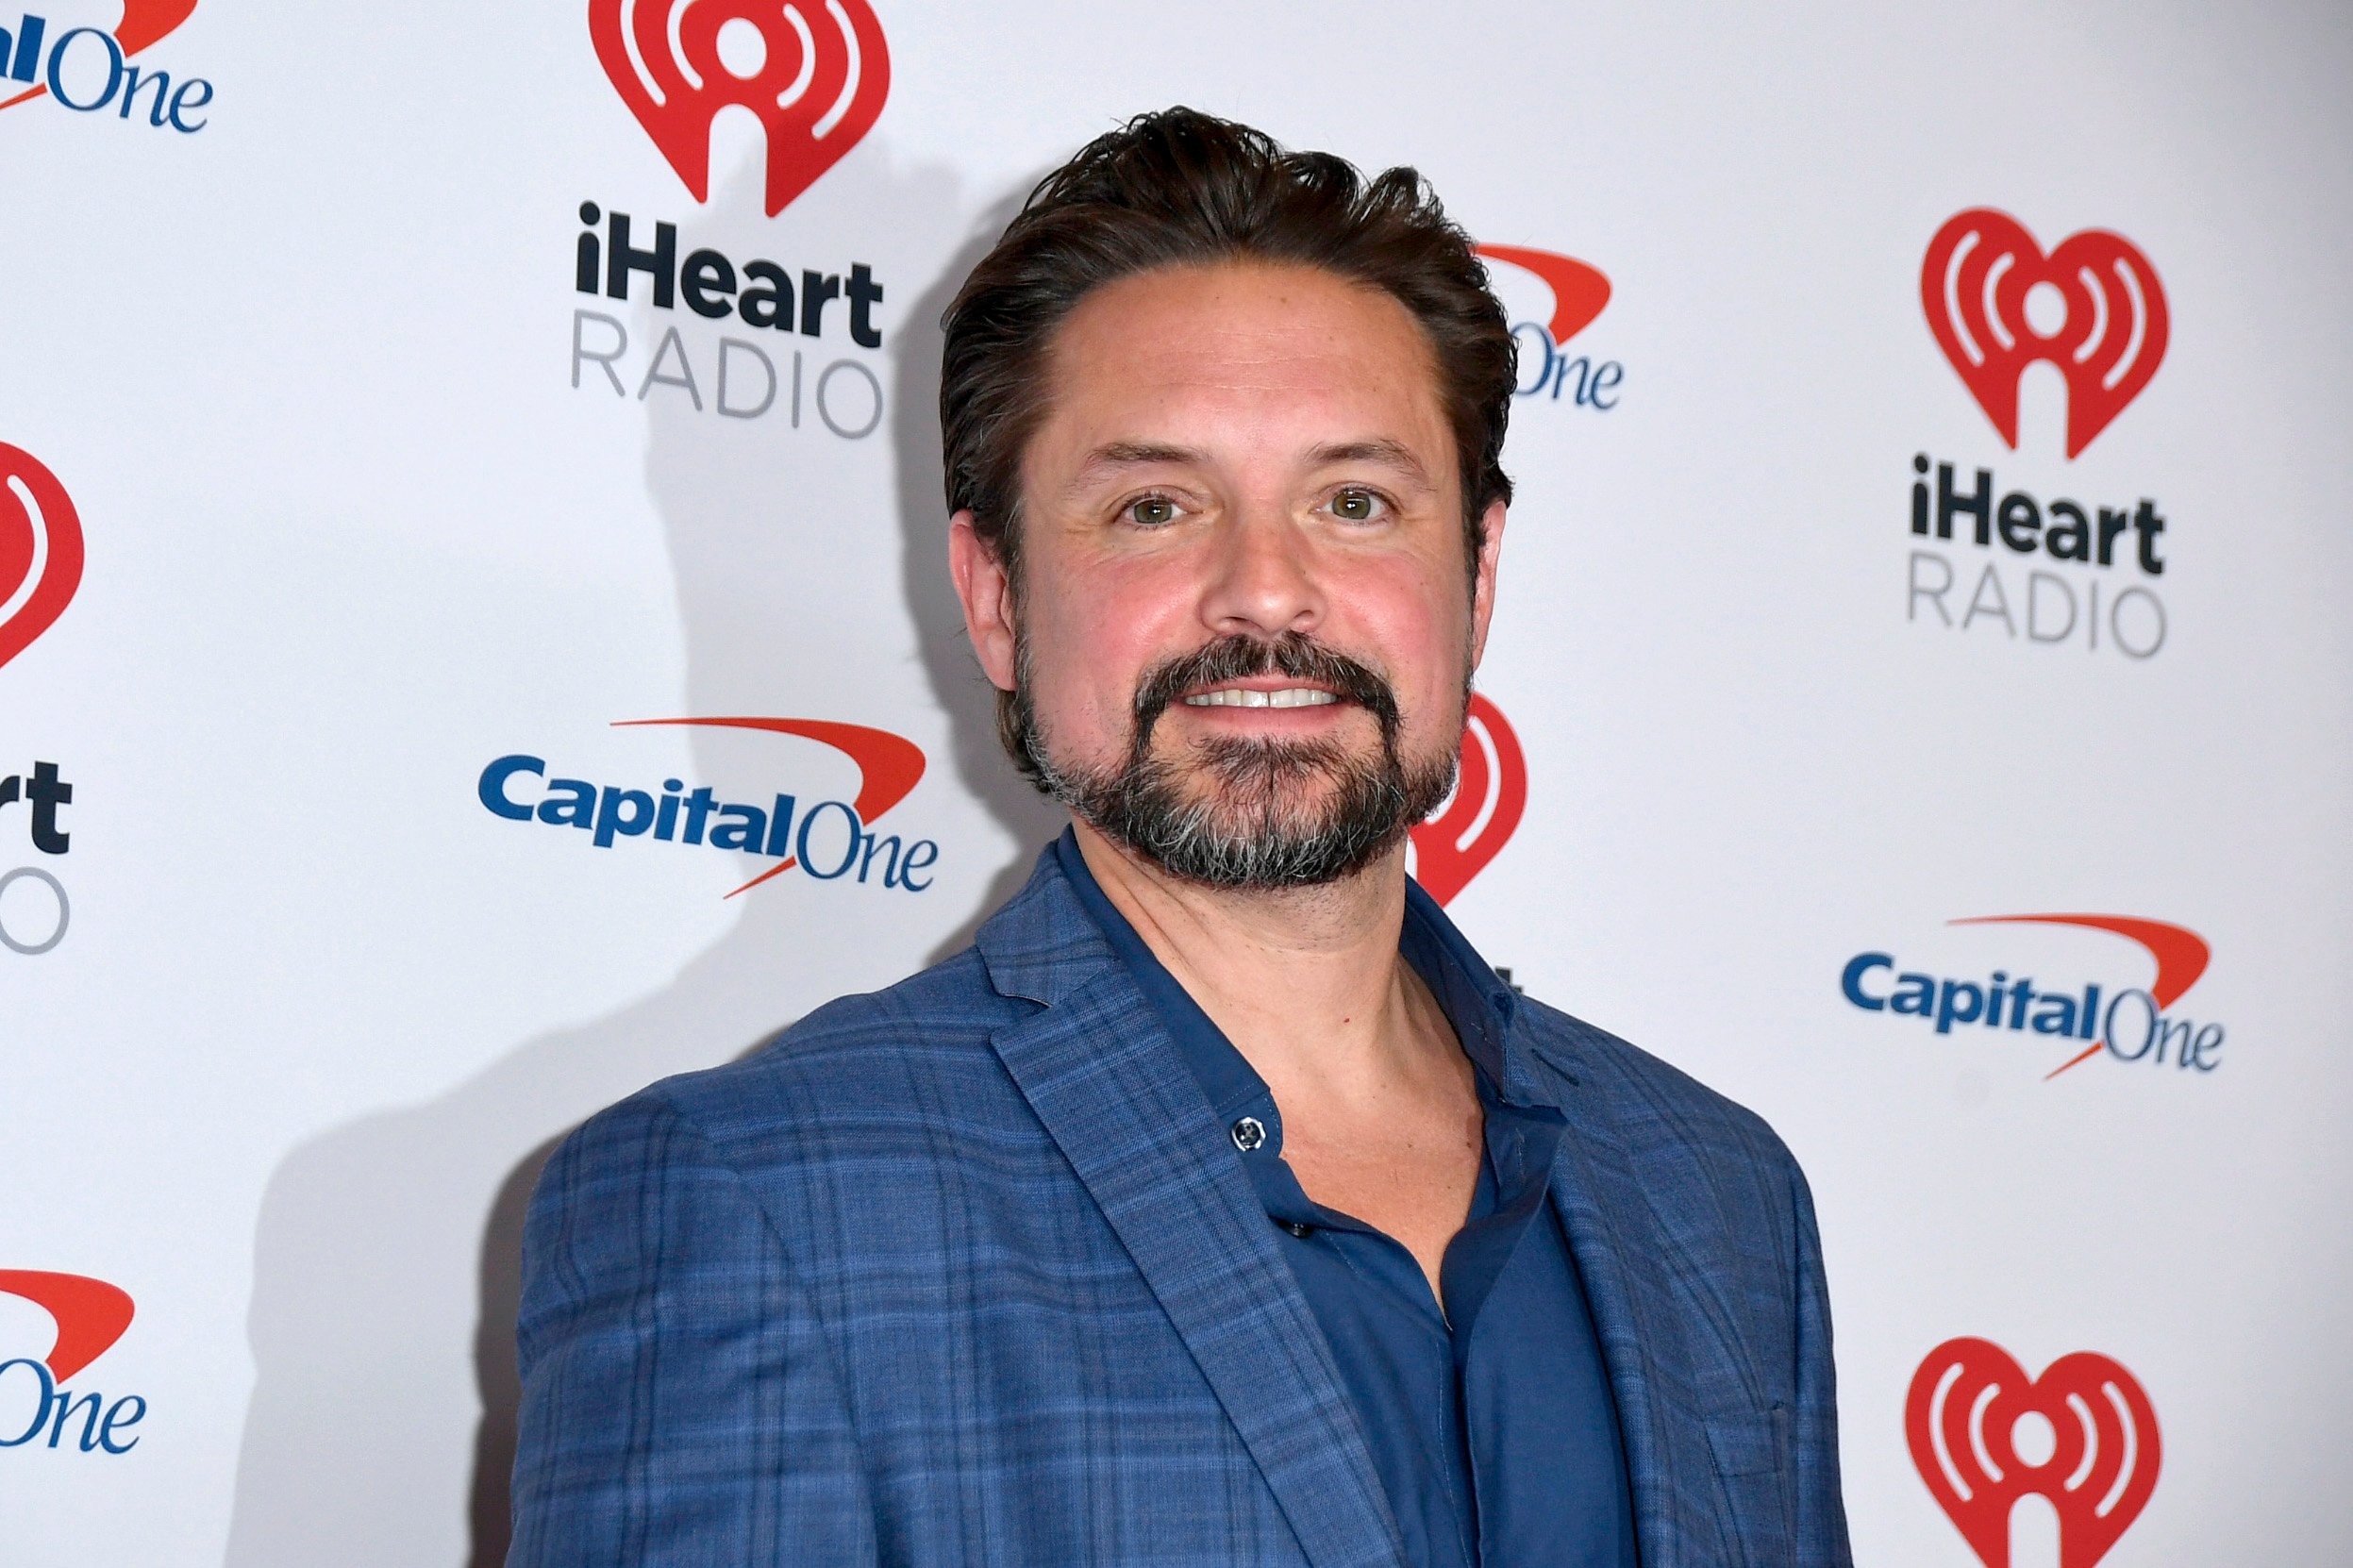 'Boy Meets World' Star Will Friedle Is Ready for More onCamera Work in